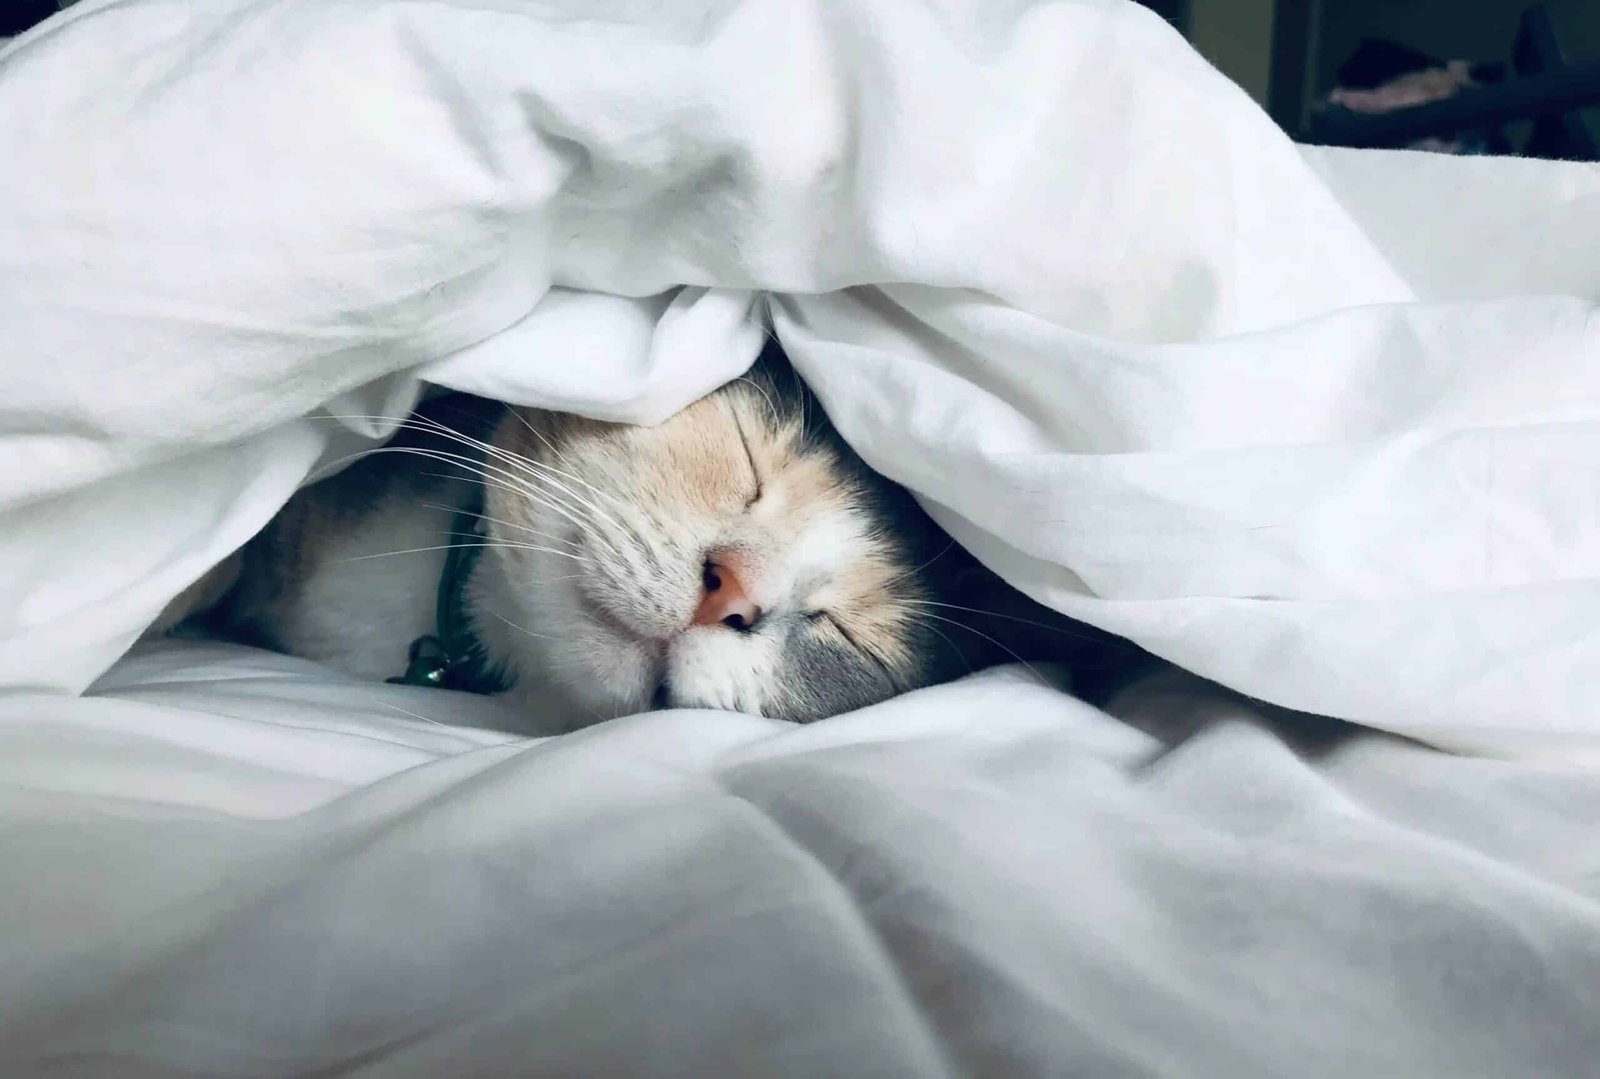 cats may have individual bedding and sleeping preferences